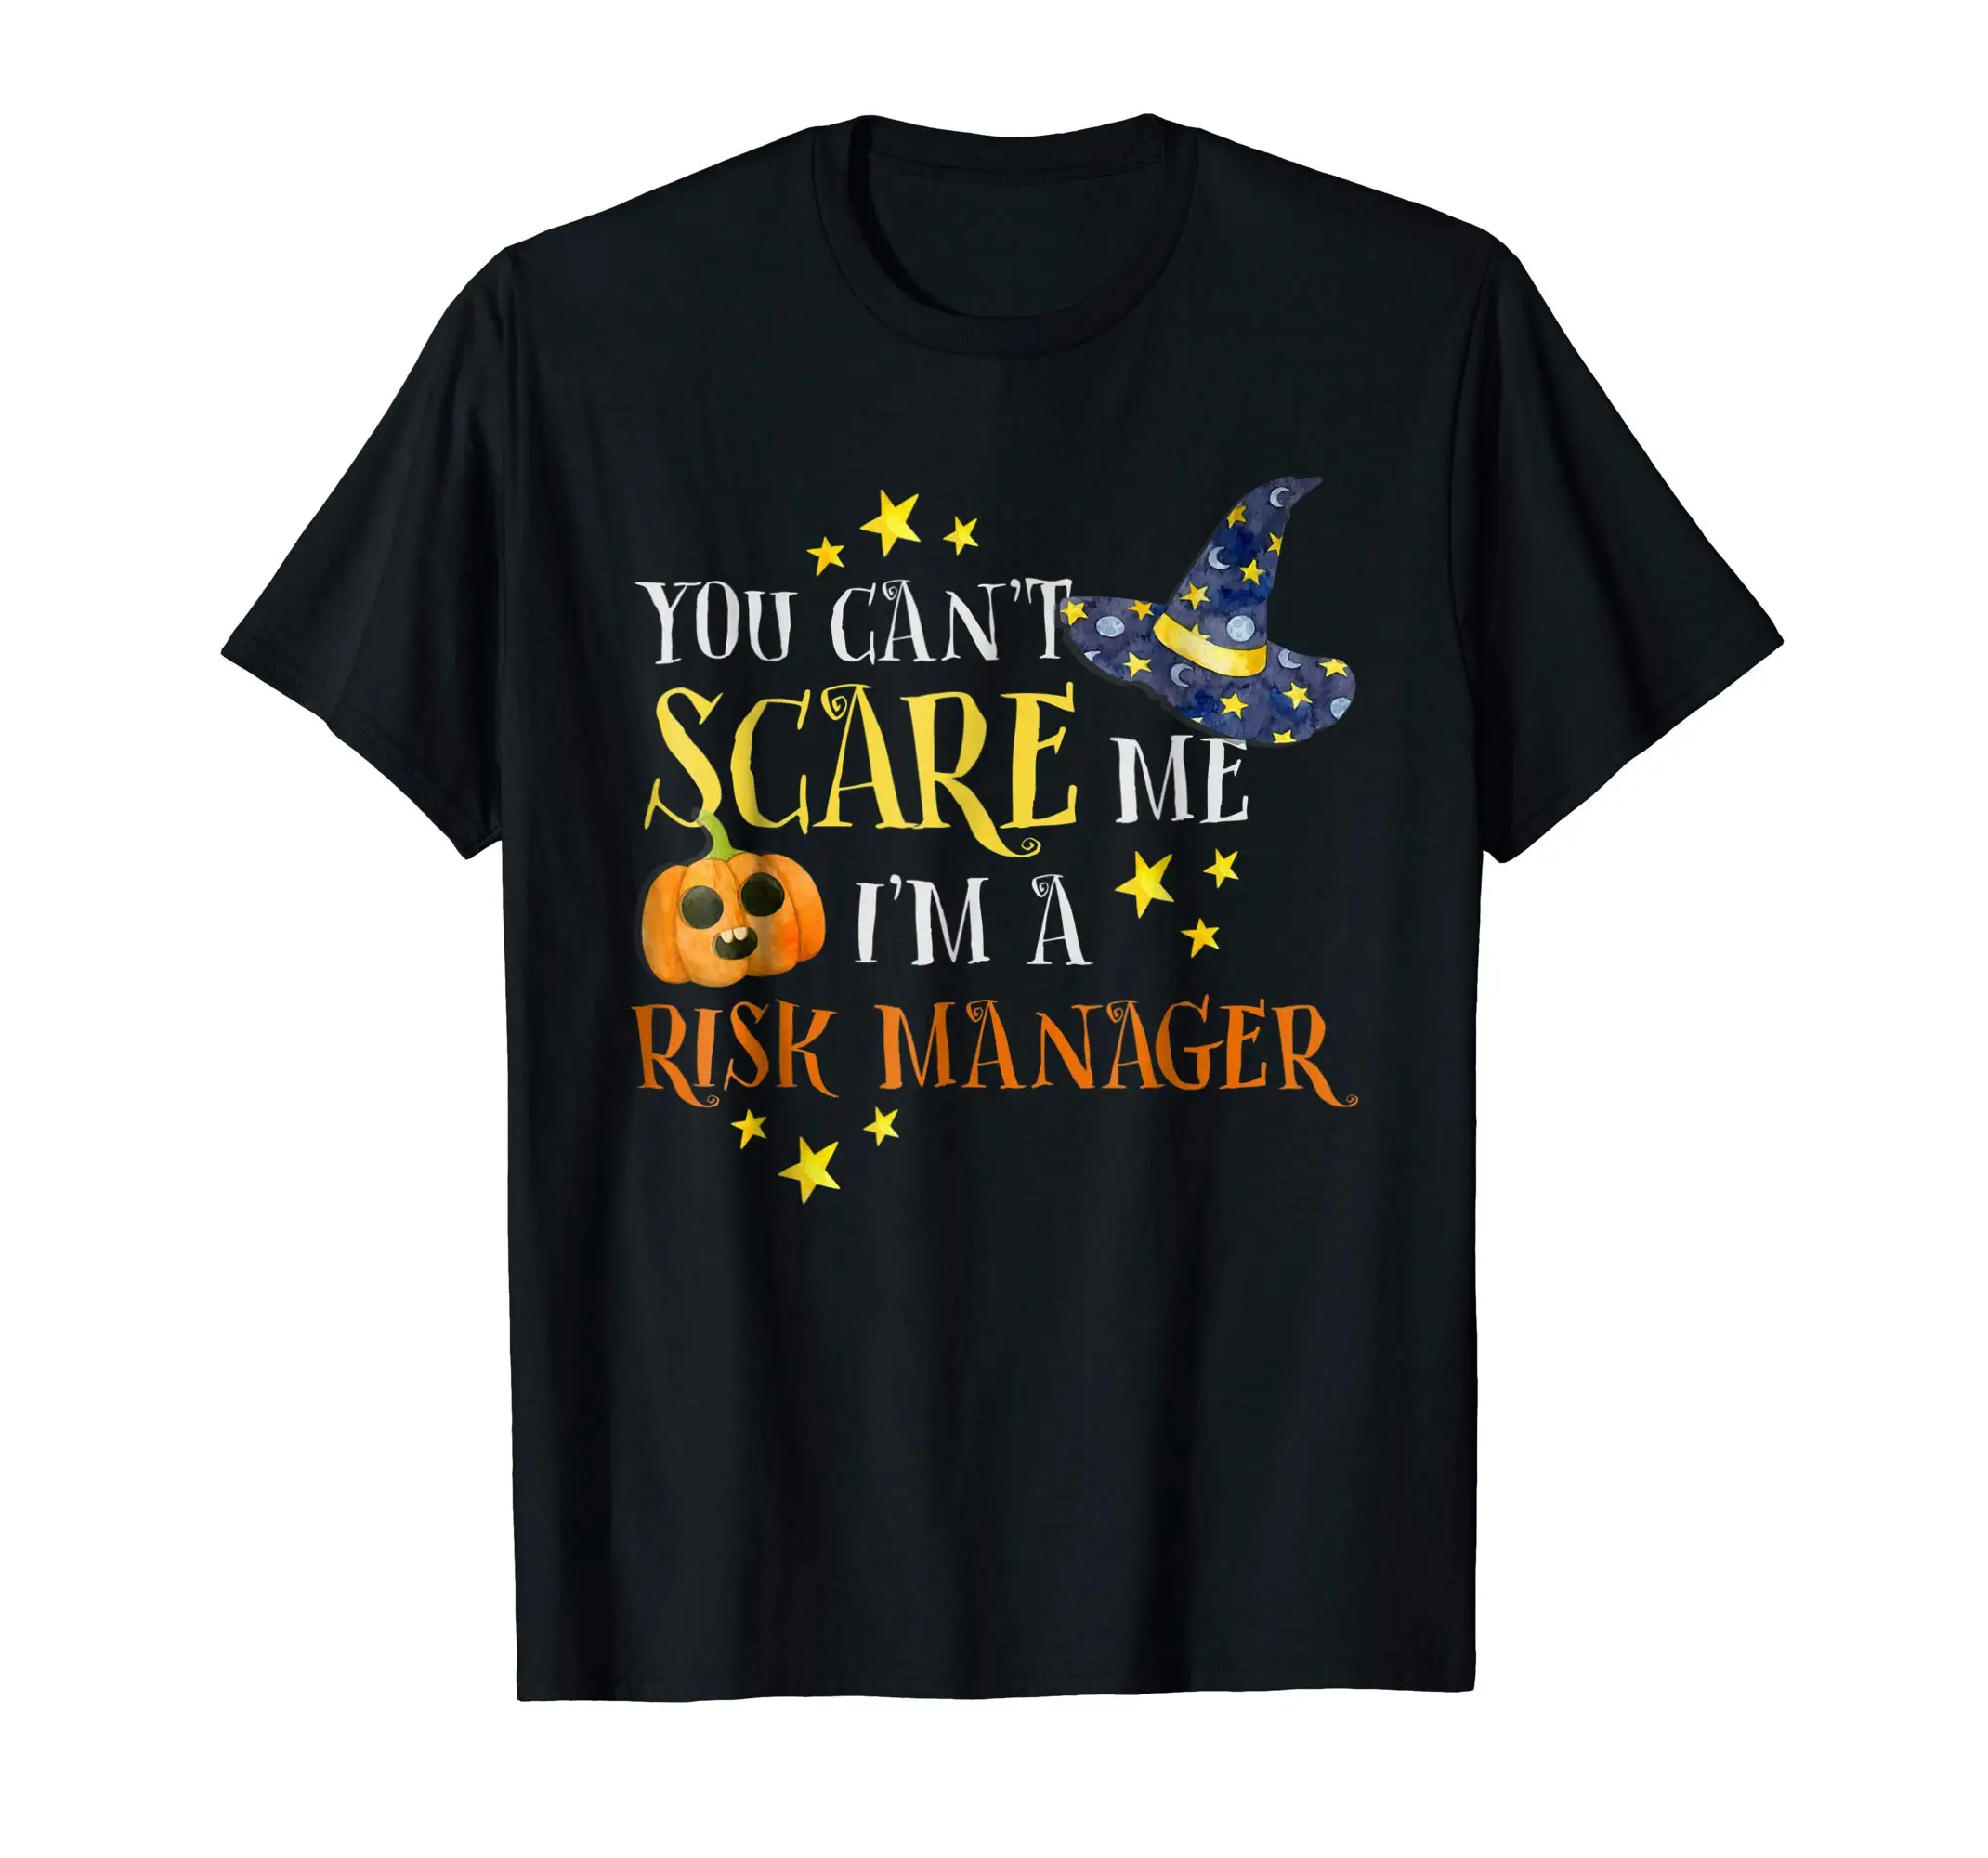 You Can't Scare Me I'm Risk Manager. Funny Halloween Adult T-Shirt Summer Cotton Short Sleeve O-Neck Unisex T Shirt New S-3XL